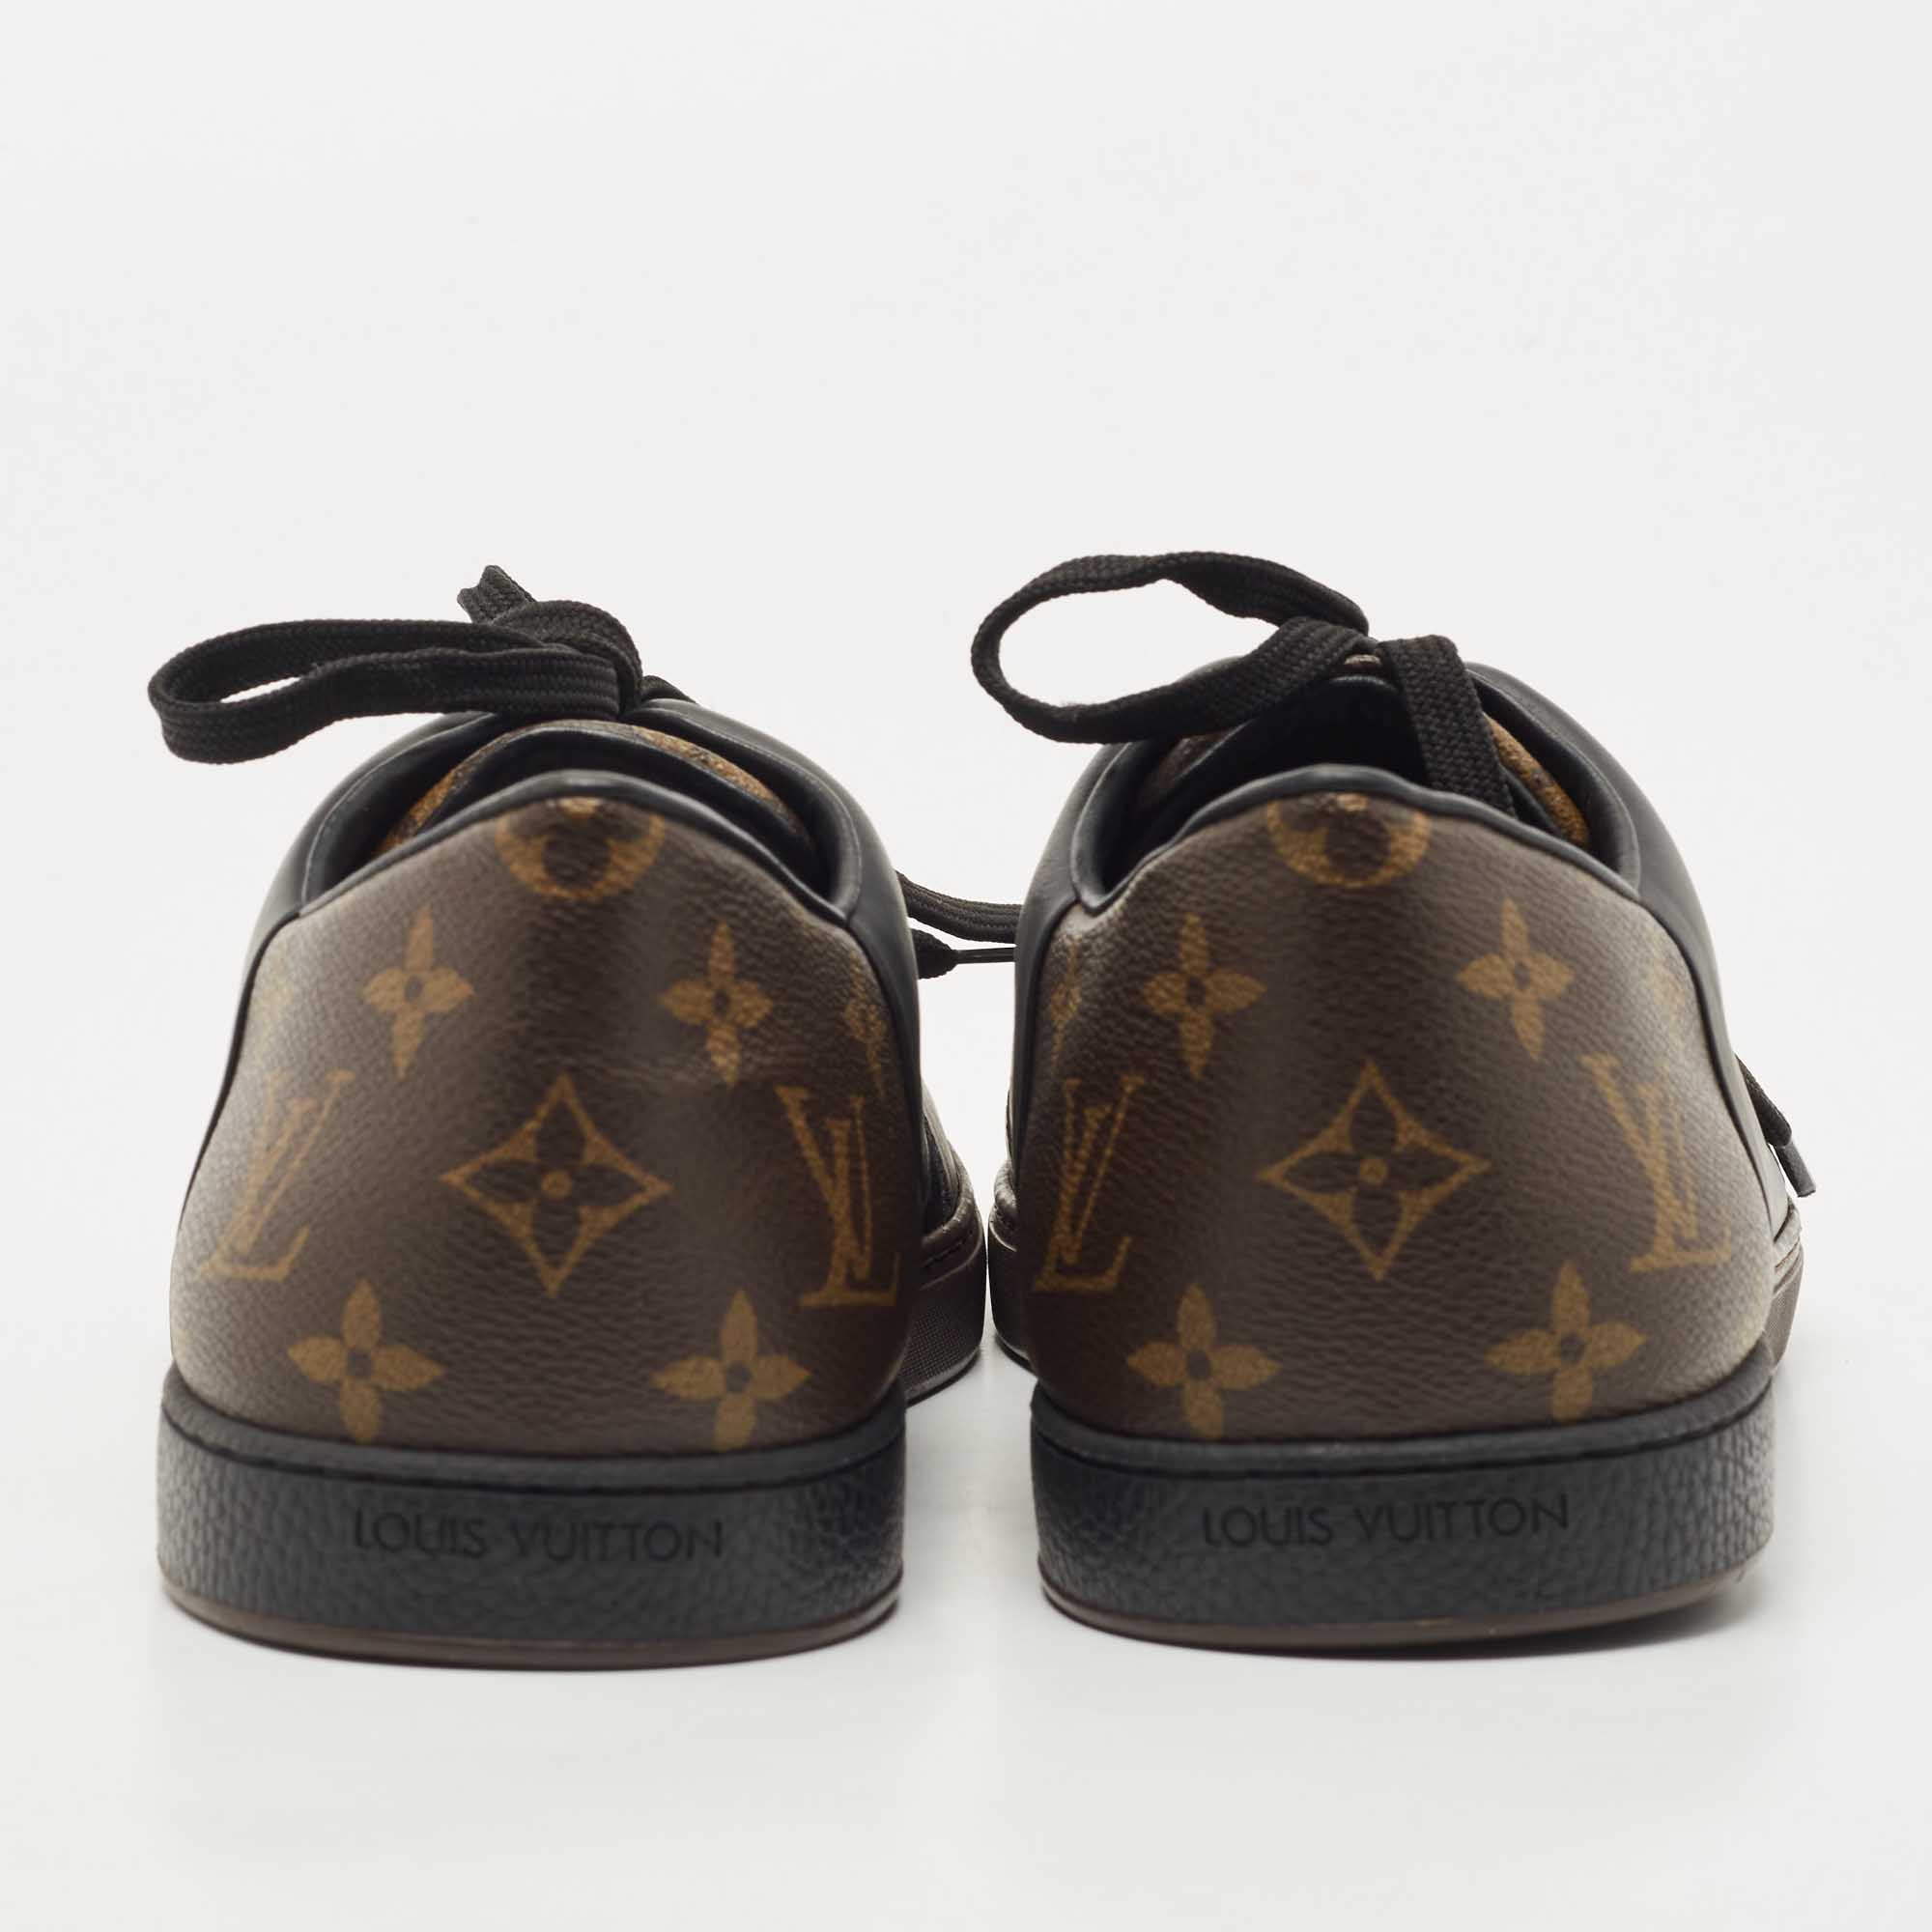 Louis Vuitton Black Leather And Monogram Canvas Line Up Sneakers Size 43